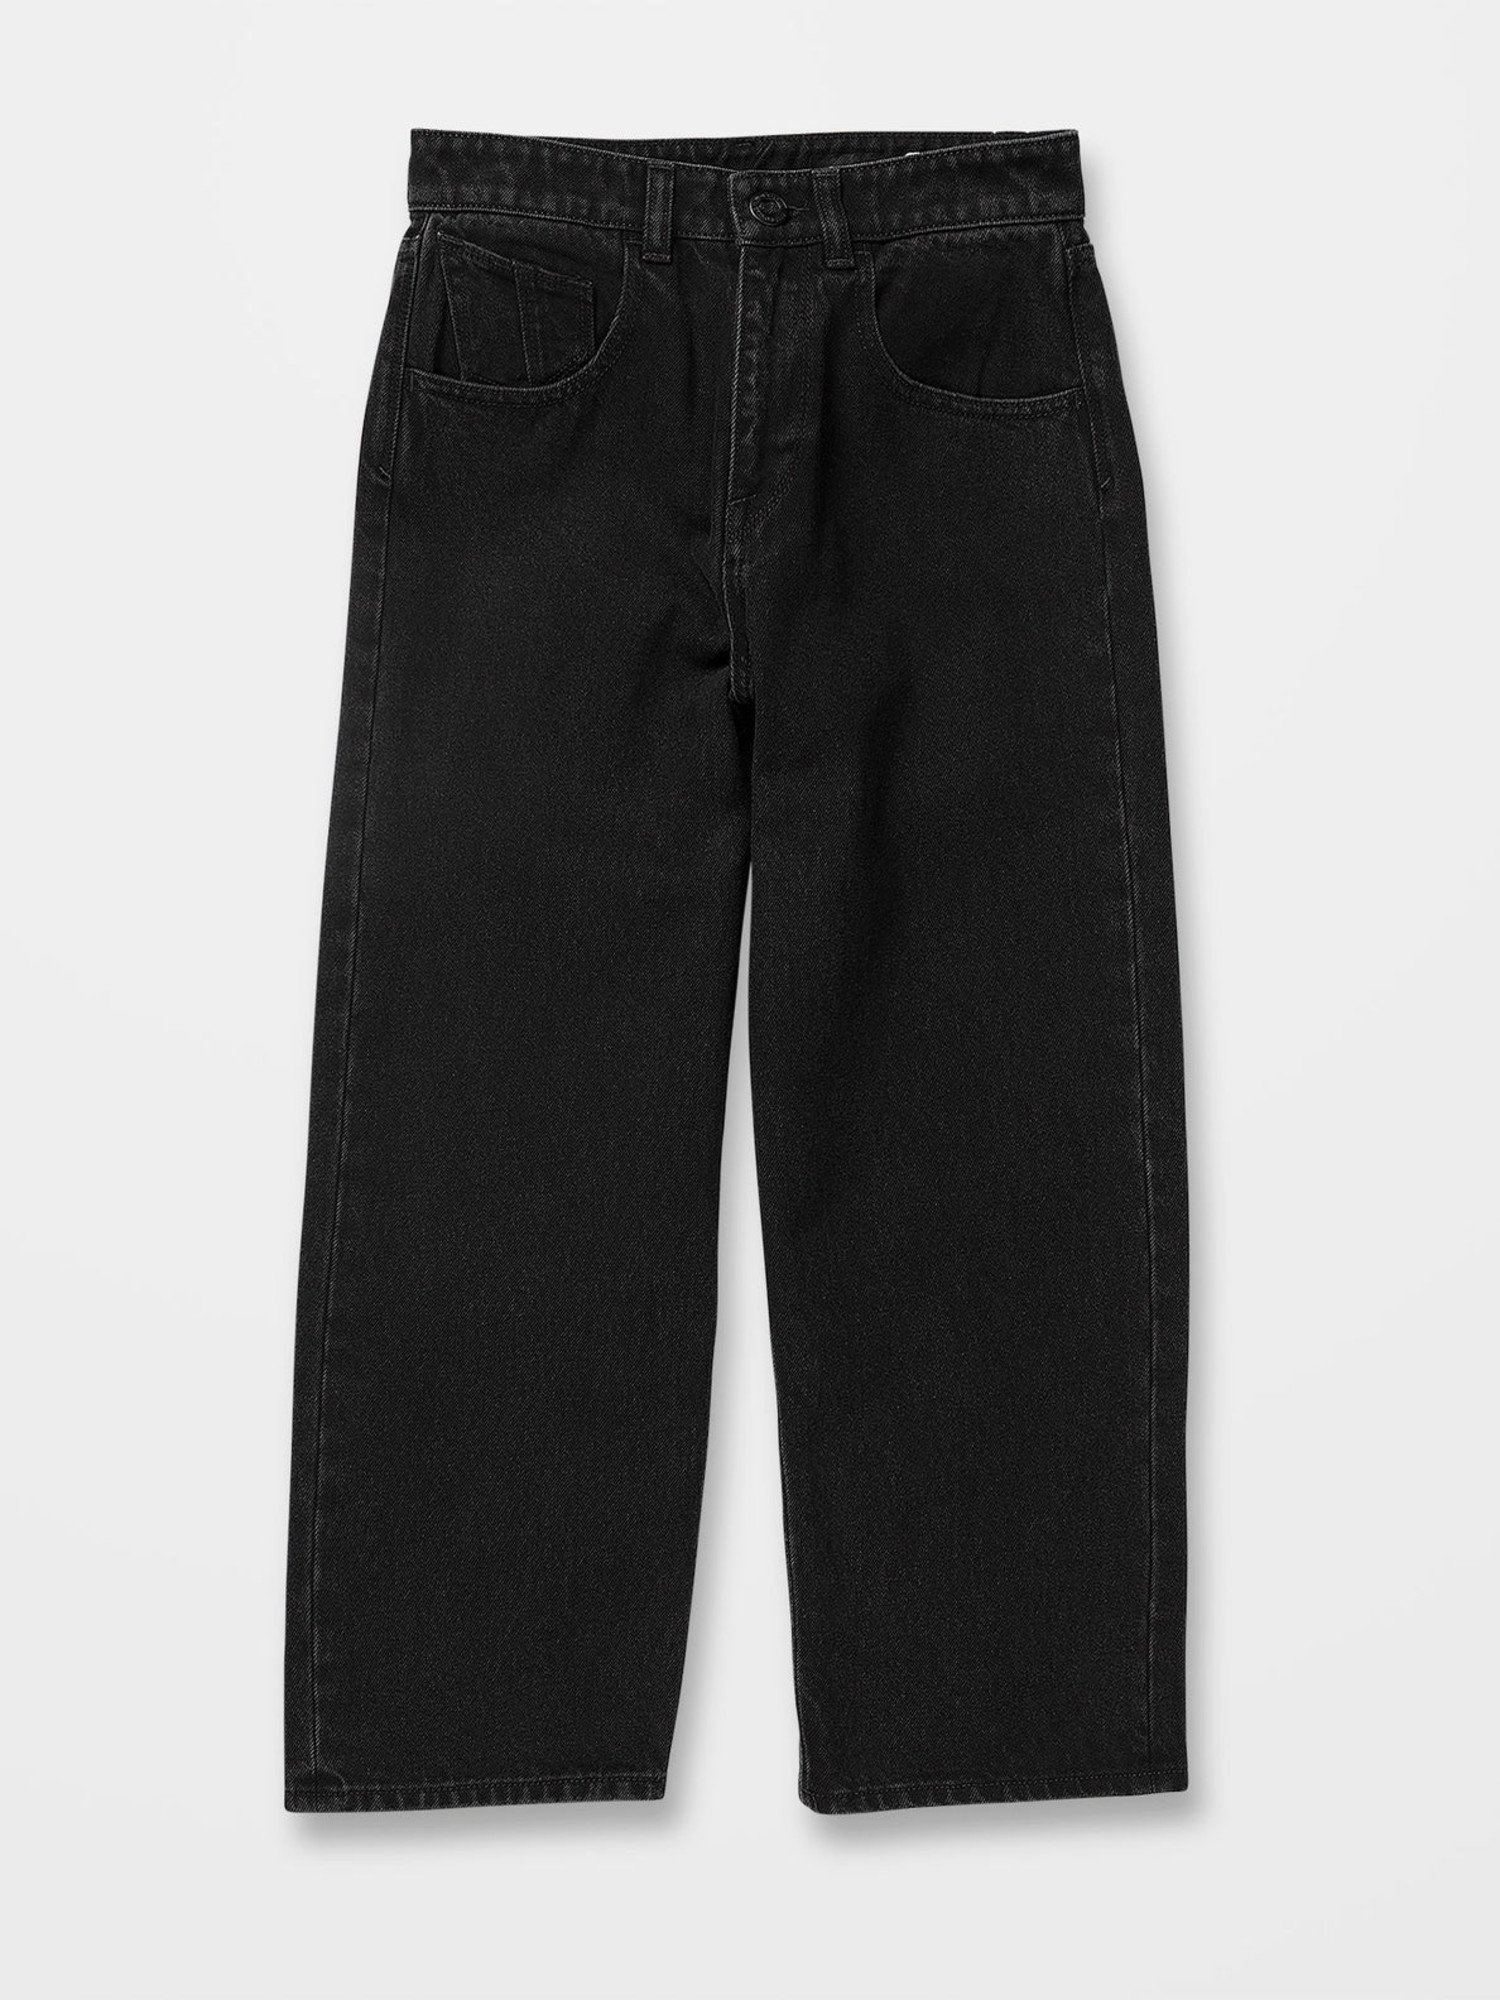 FALACE OXLO BORTLES WASHED DENIM JEAN SWEATPANTS · Boopdocom · Online Store  Powered by Storenvy